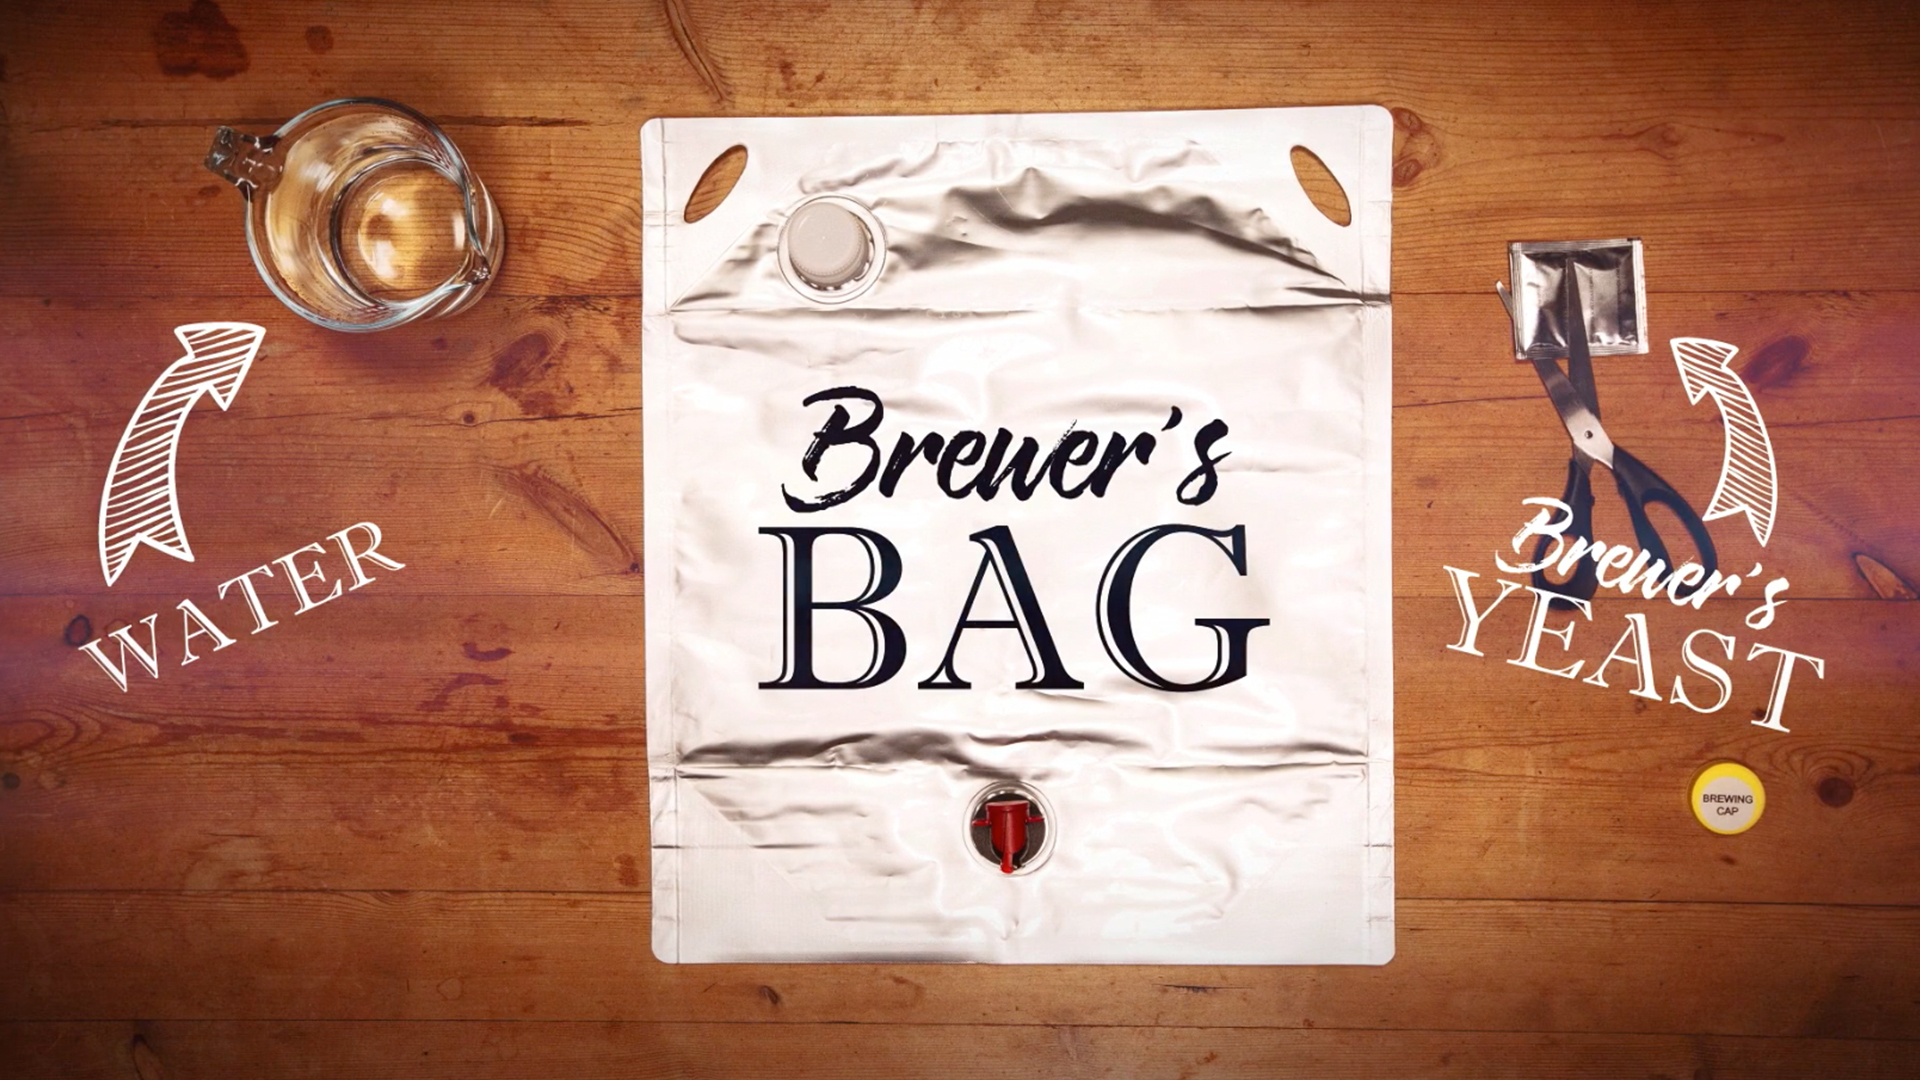 Home Brewing Beer Kit, a video by Bruizer Video & Film Agency for Muntons